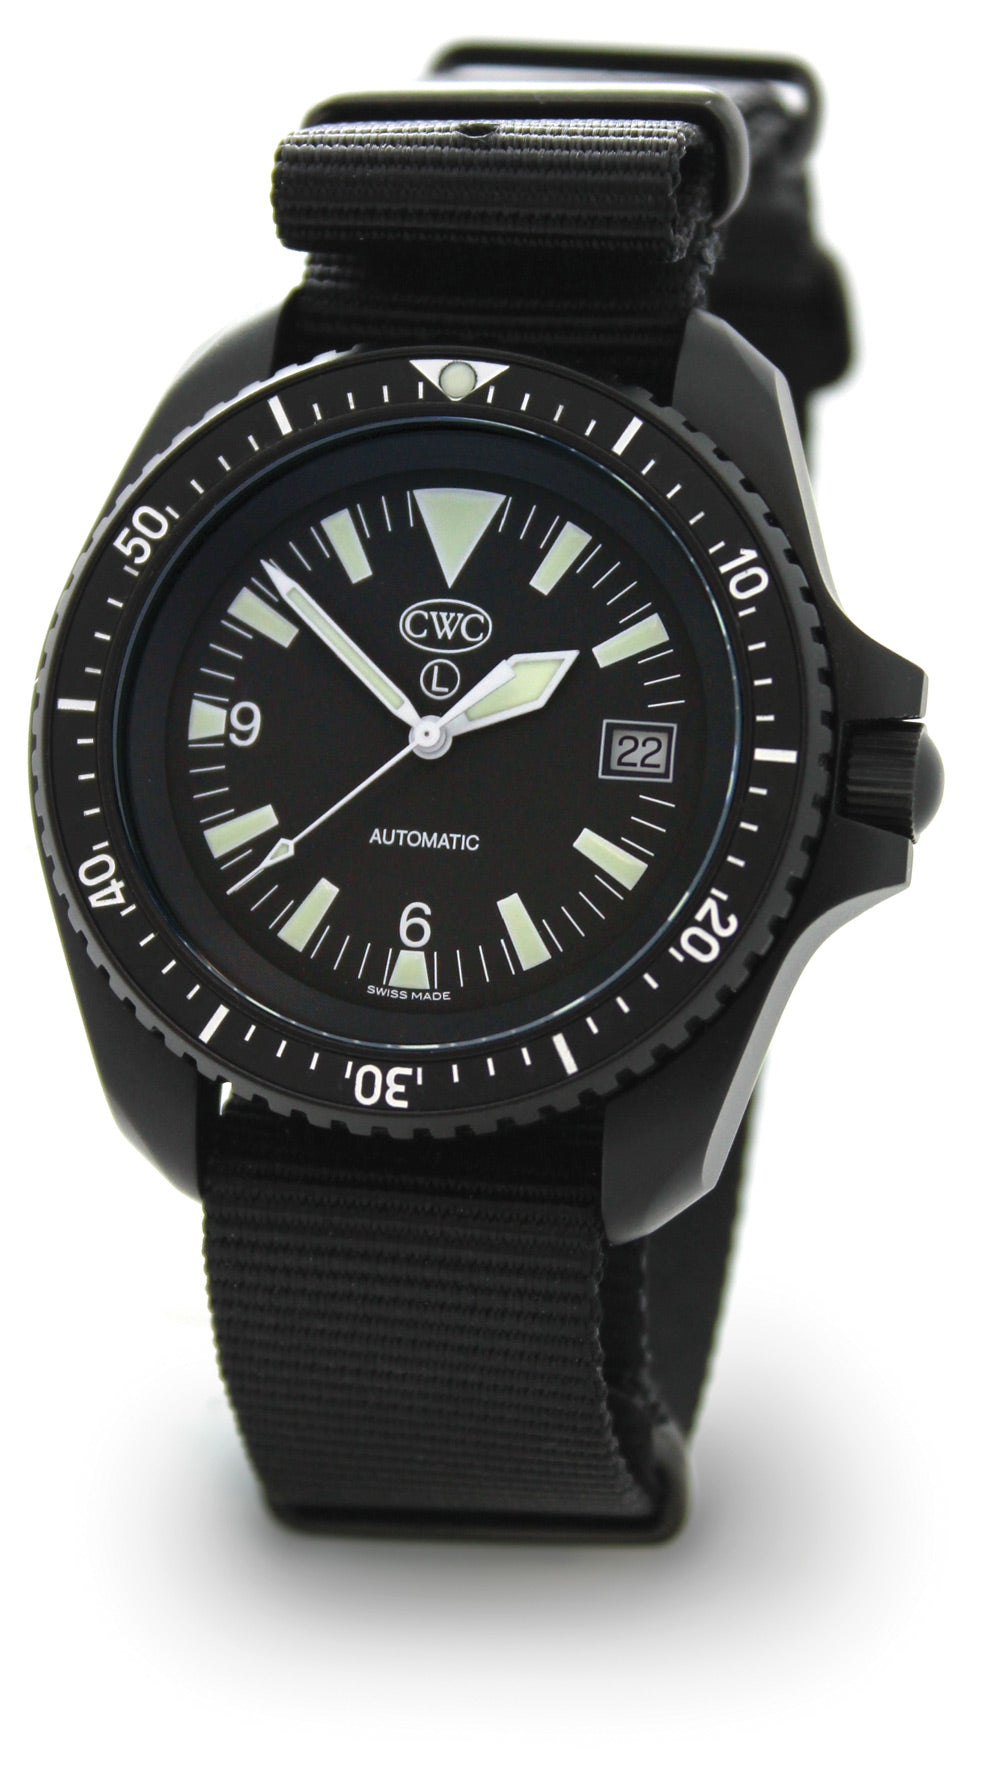 CWC DIVERS WATCH SF300 AS120-D